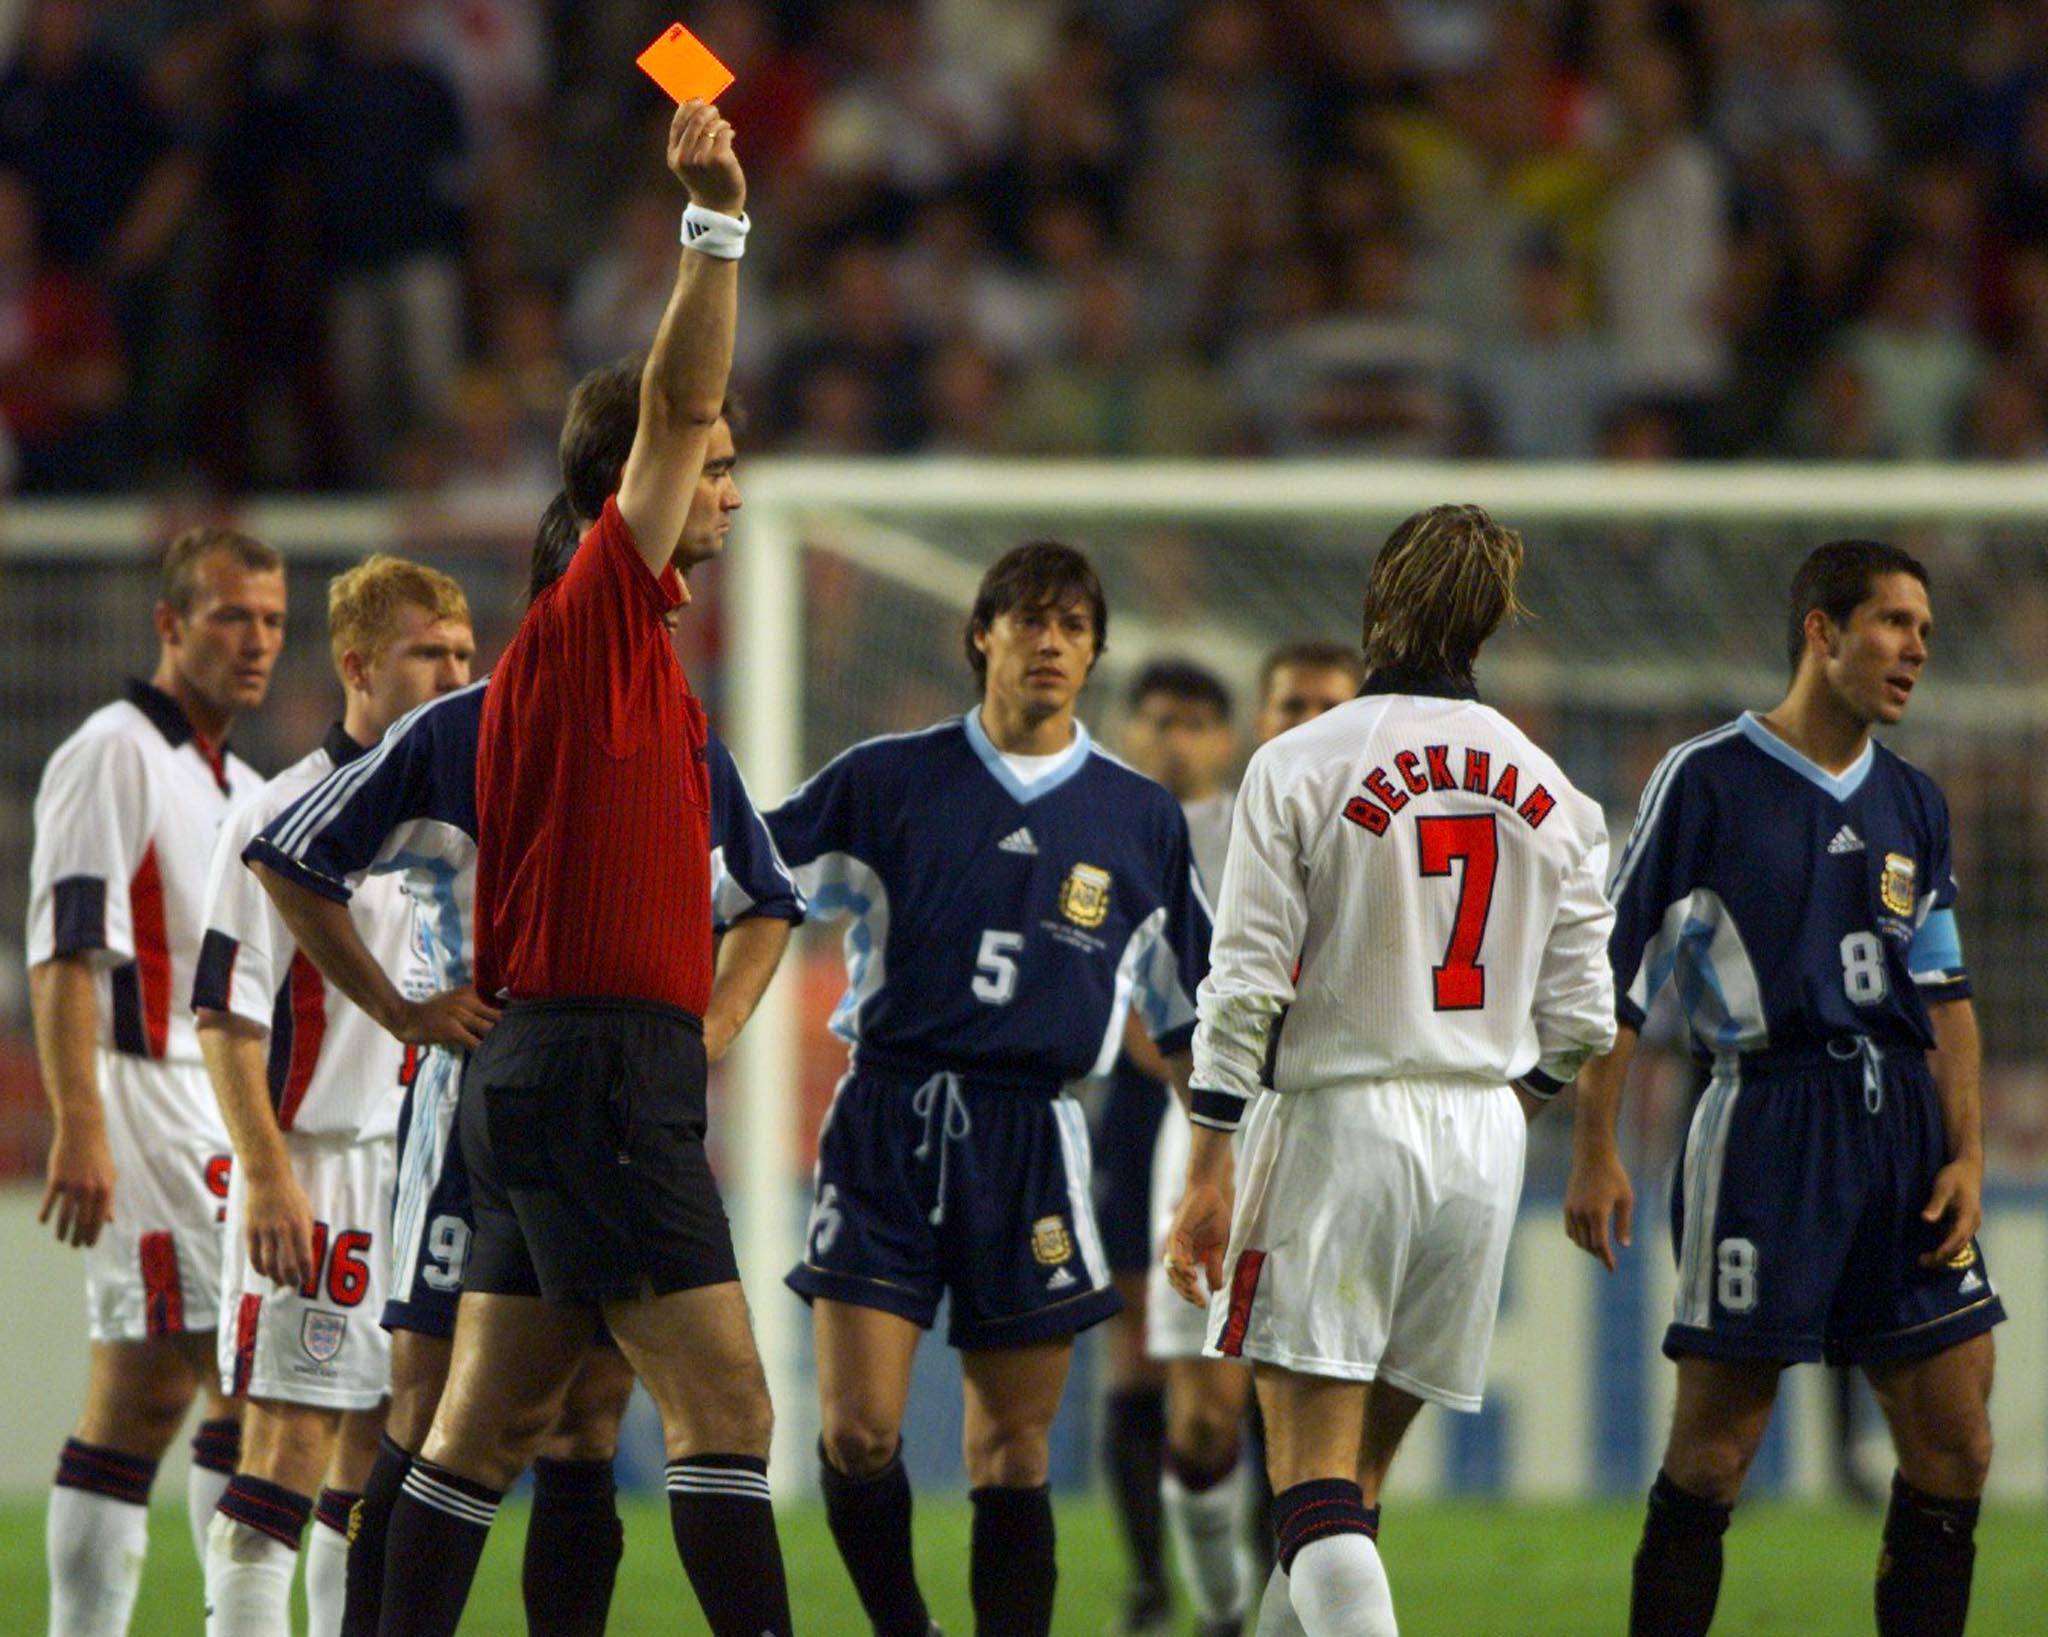 ENGLAND'S BECKHAM IS SENT OFF AFTER AN INCIDENT WITH ARGENTINA'S SIMEONE.